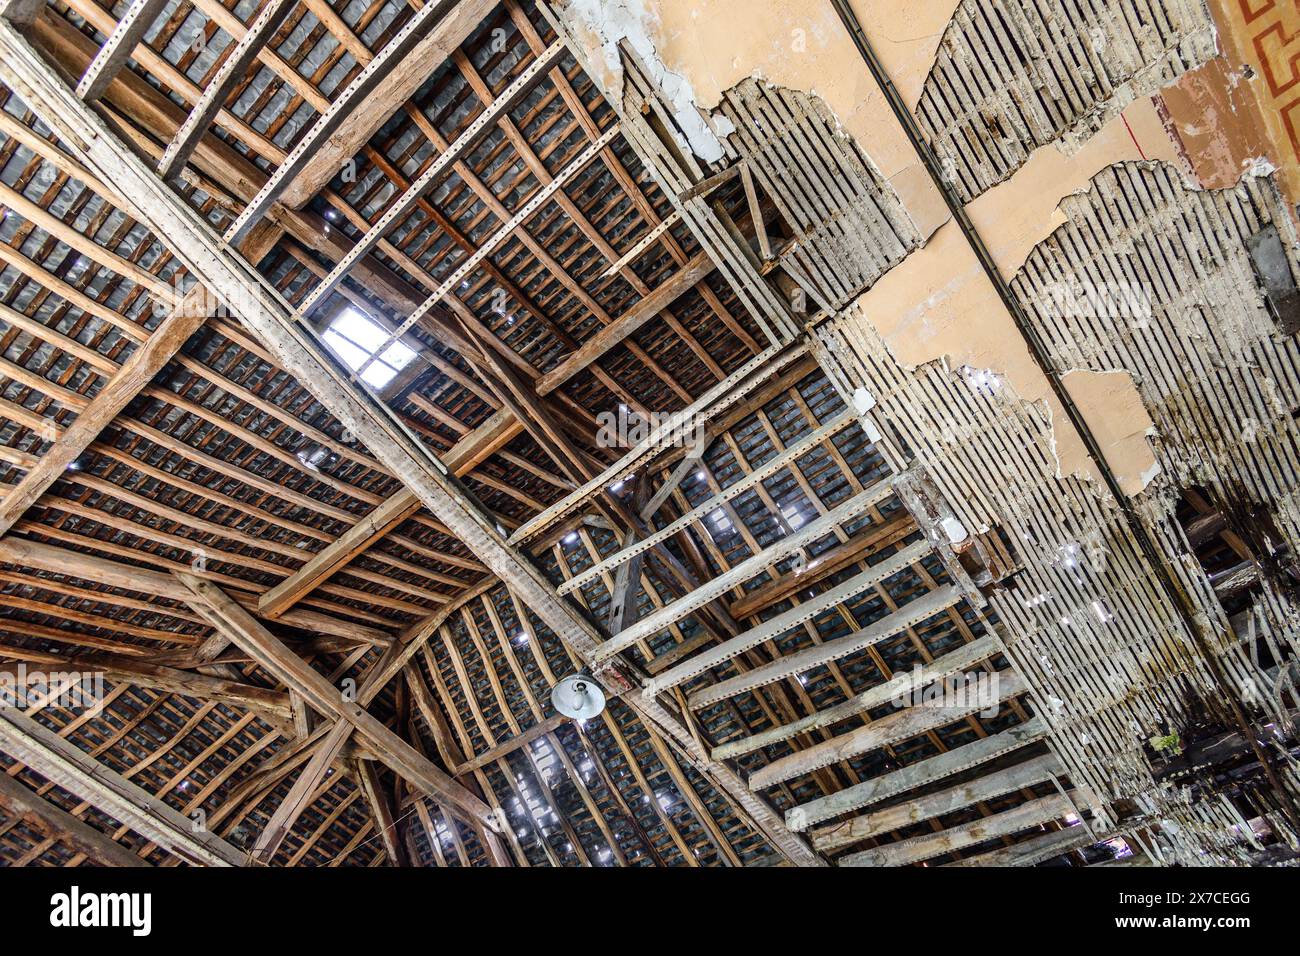 Collapsed ceiling revealing beams and laths in roof structure - Argenton-sur-Creuse, Indre (36), France. Stock Photo